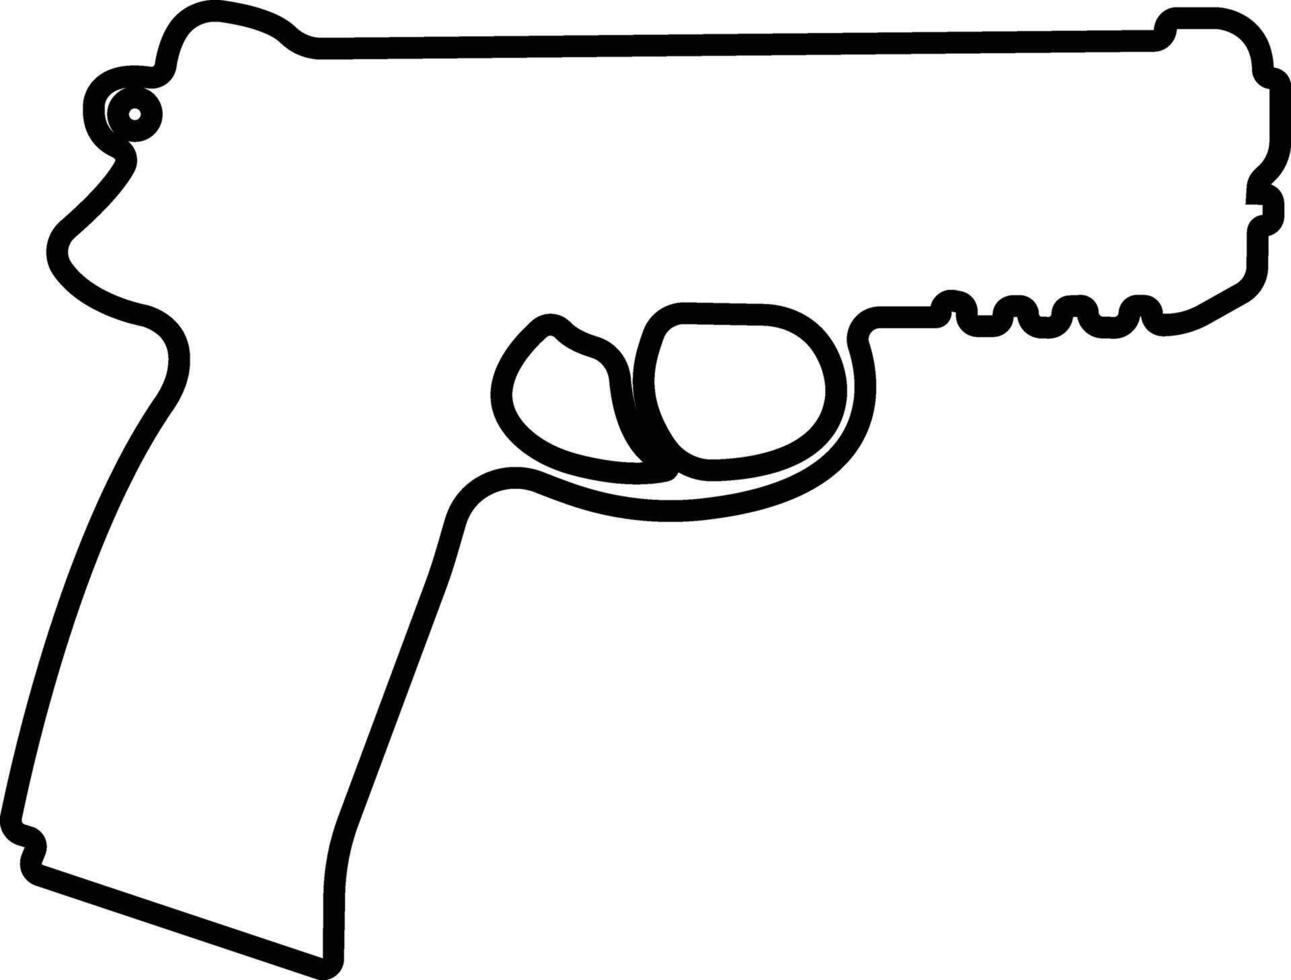 Pistol icon in line from army and war isolated on symbol vector for apps and website. gun, rifle, revolver for Wild West concept, police officer ammunition or military weapon.